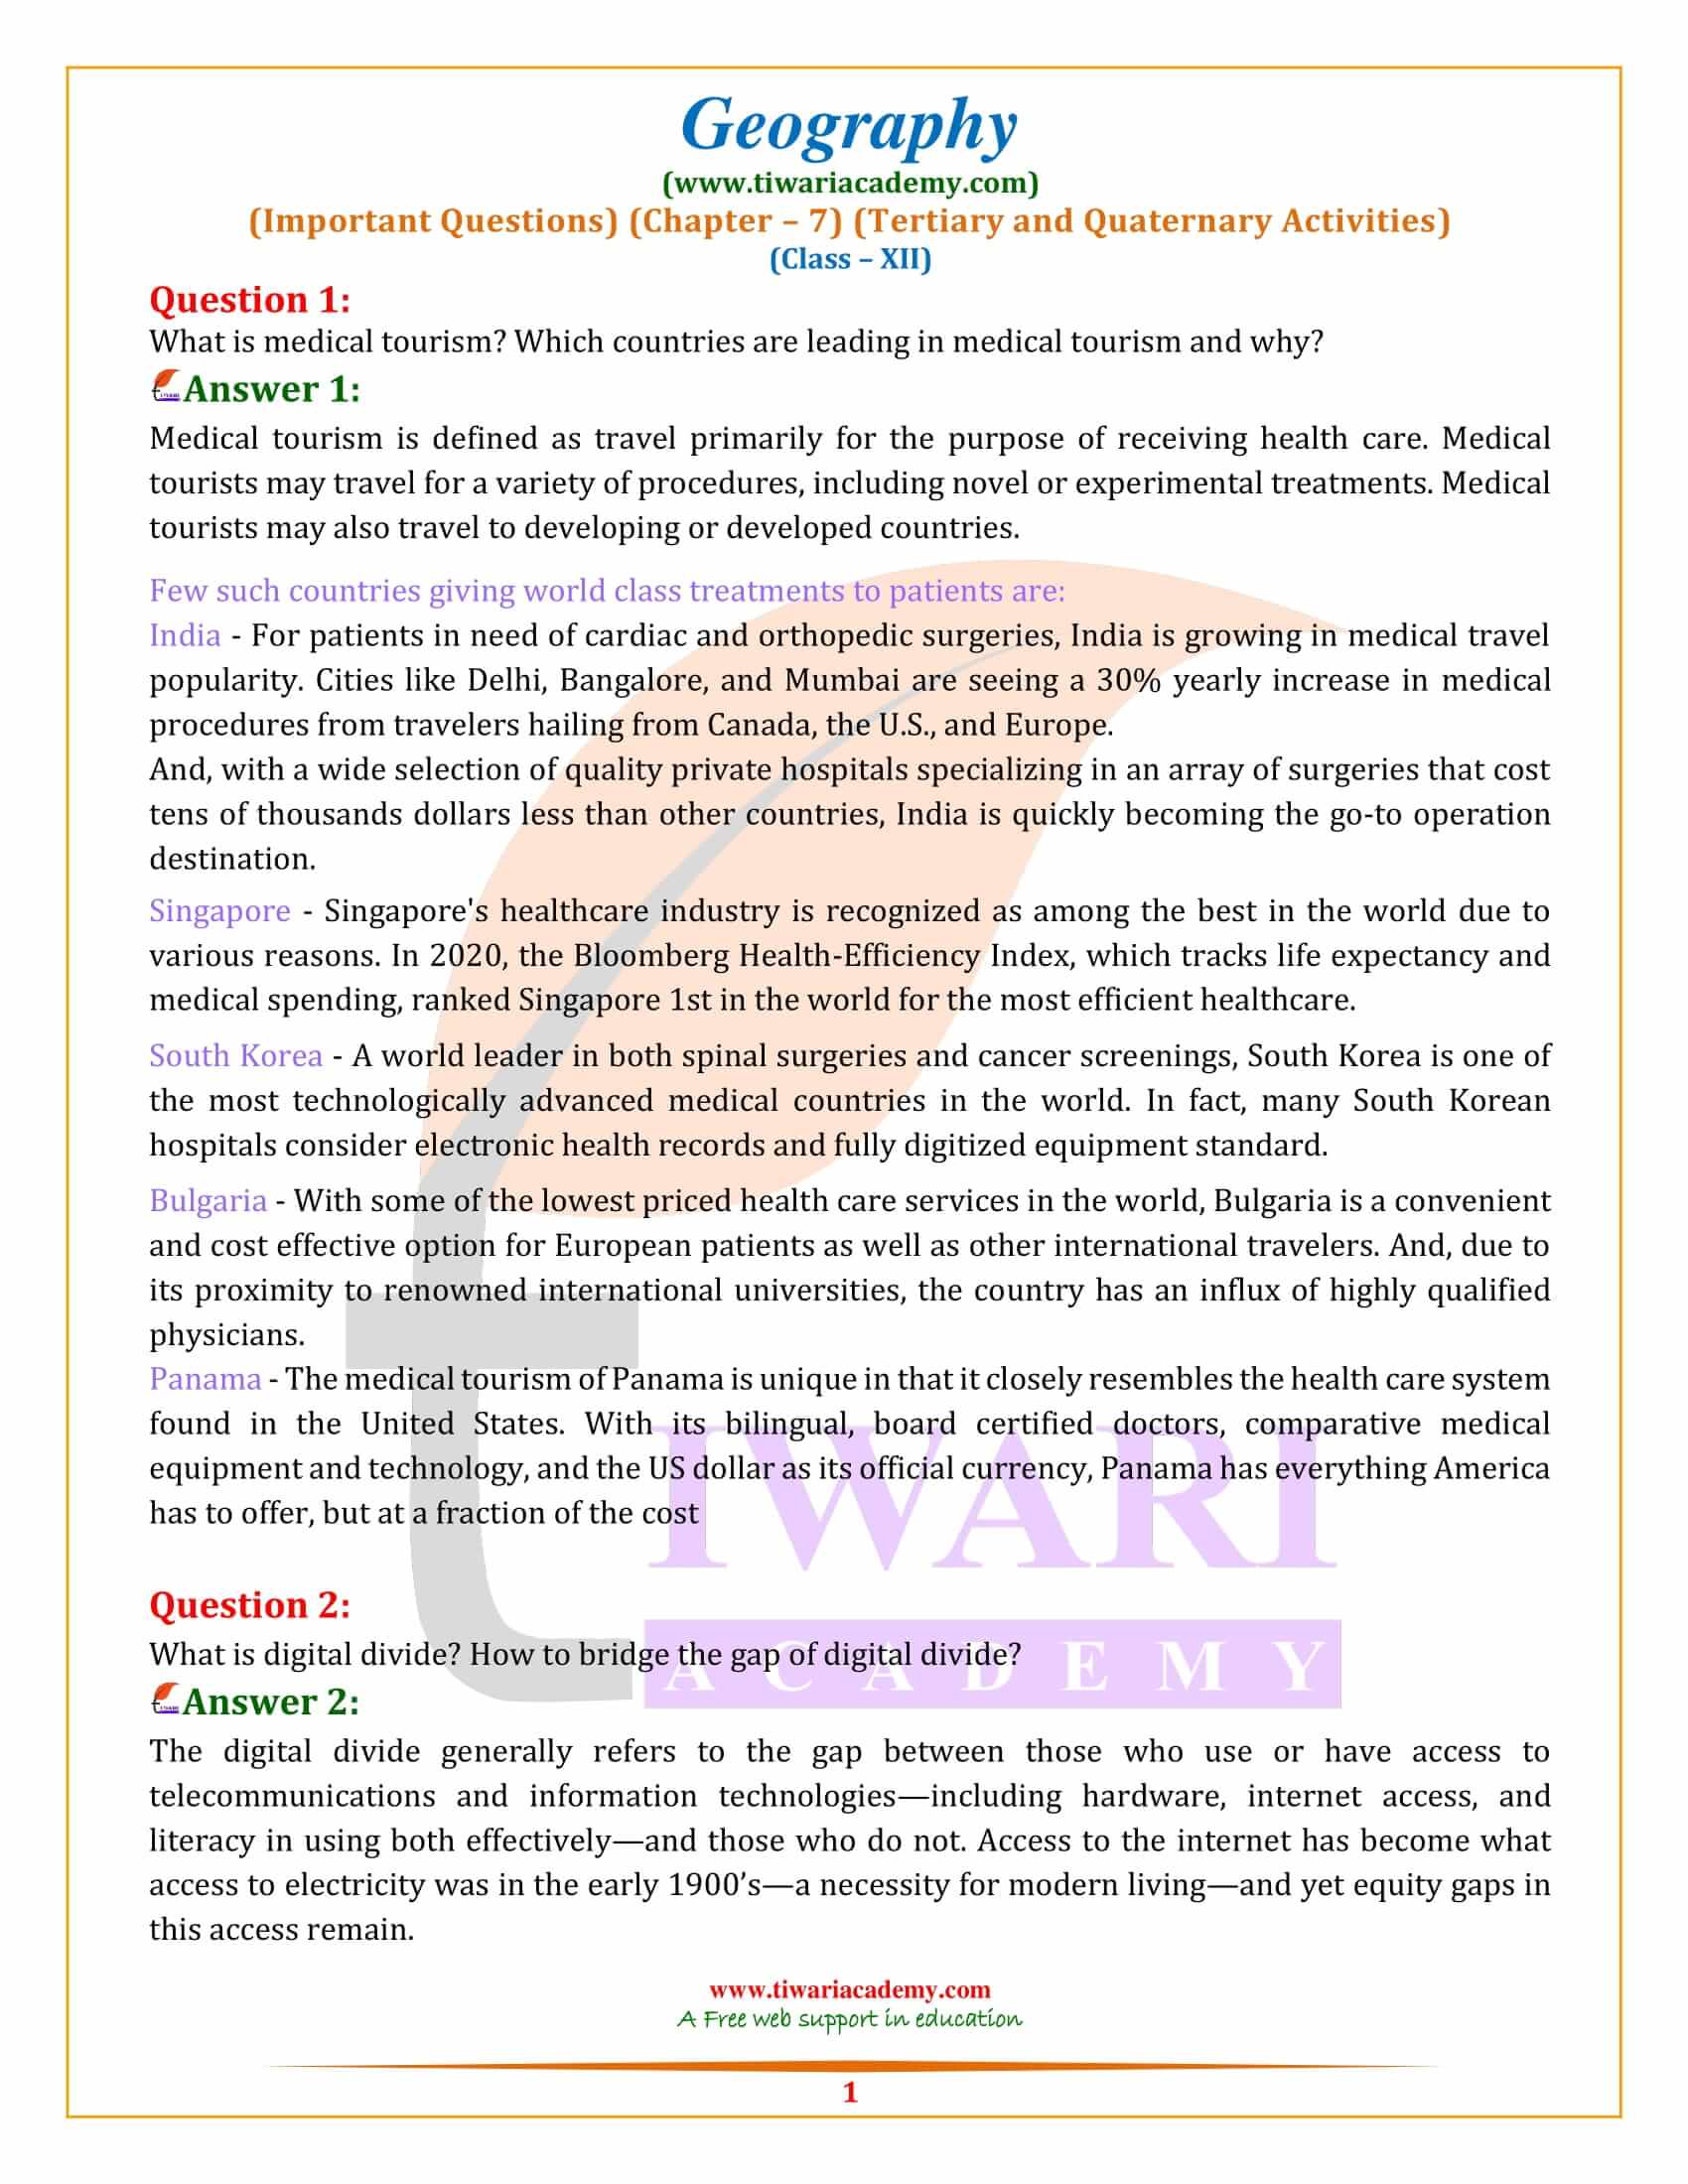 Class 12 Geography Chapter 7 Important Questions Answers